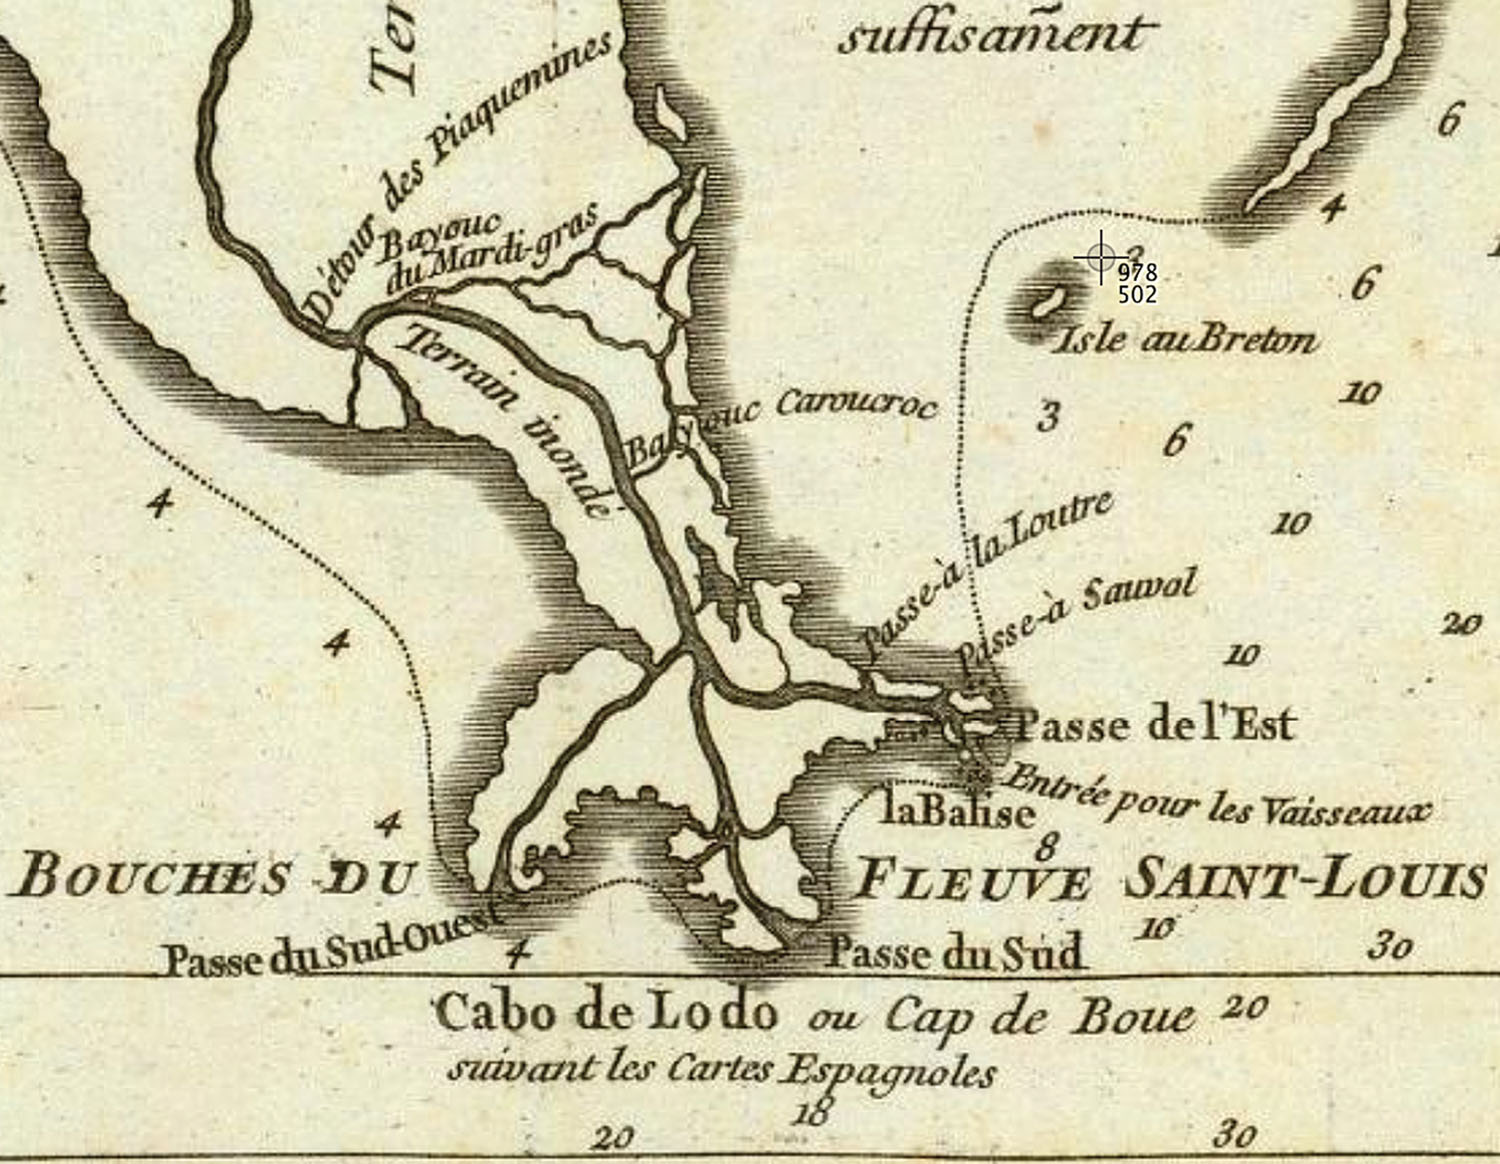 Detail of a c. 1752 French map of Louisiana showing Bayouc du Mardi-gras as well as “Piaquemines” Bend. The map also labels the delta in French as the “mouths of the Saint Louis River.” The spelling “Bayouc” is apparently archaic French.